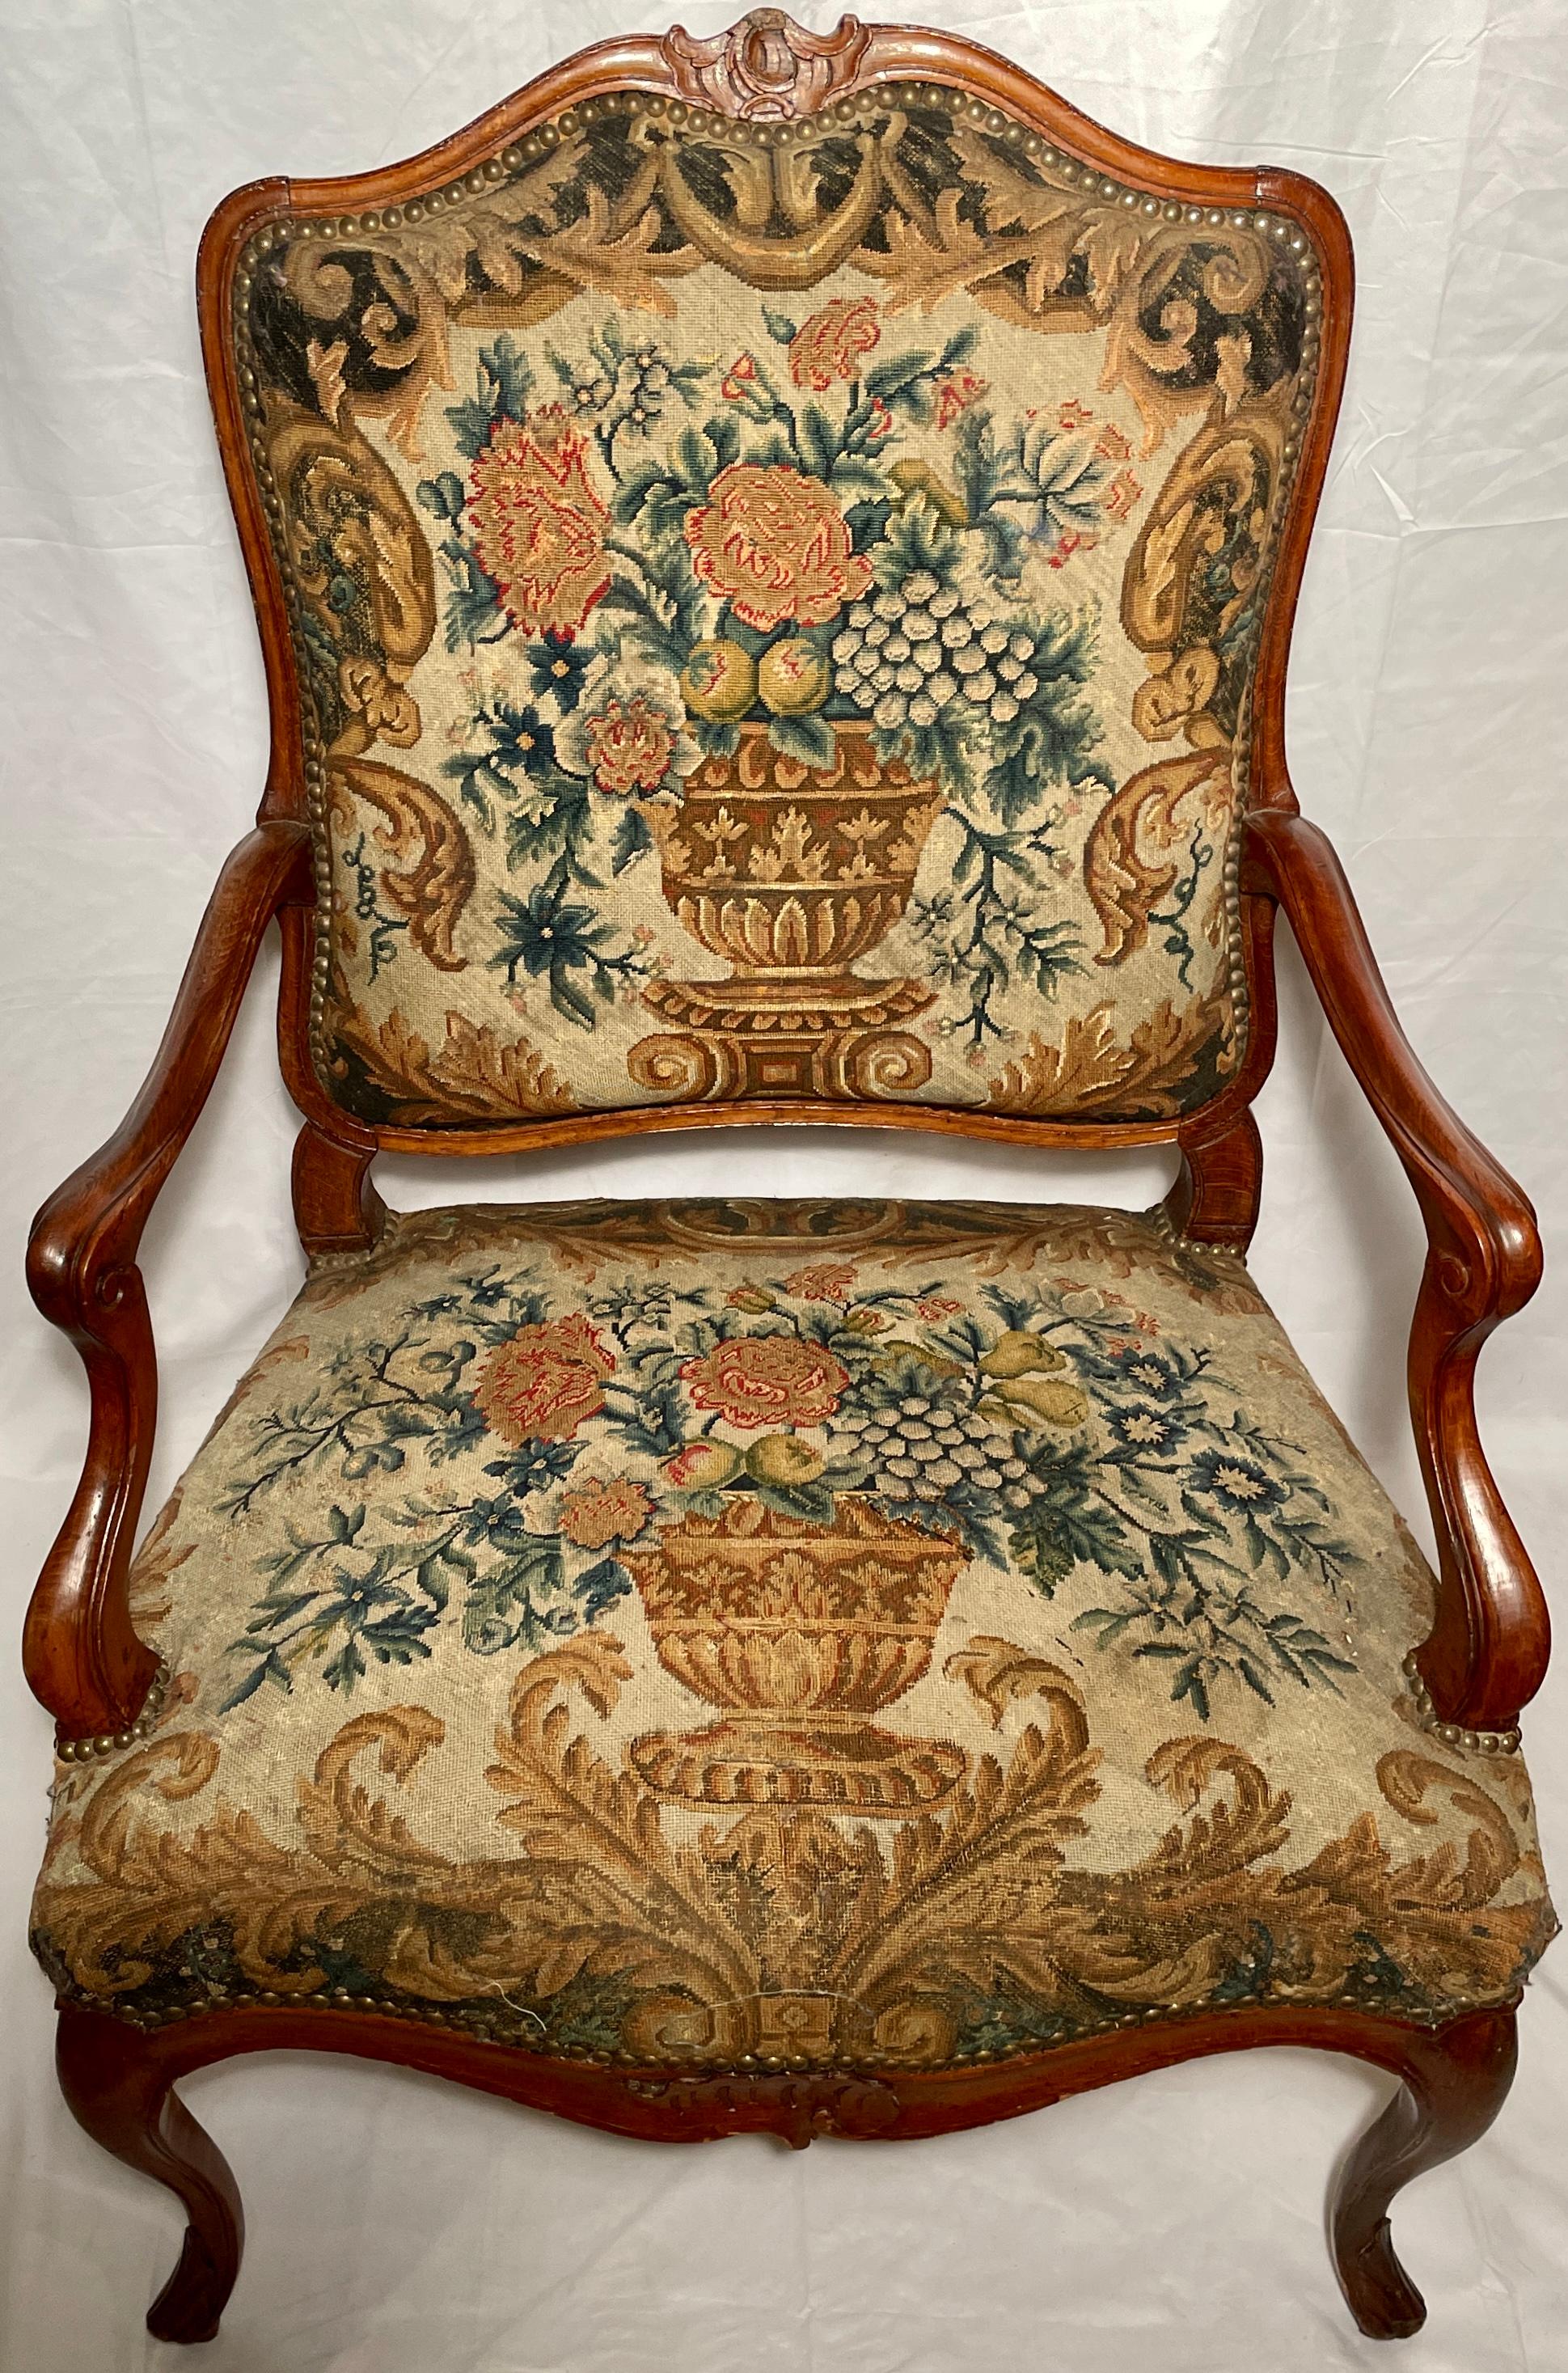 Antique 19th century French carved walnut needlepoint armchair. 